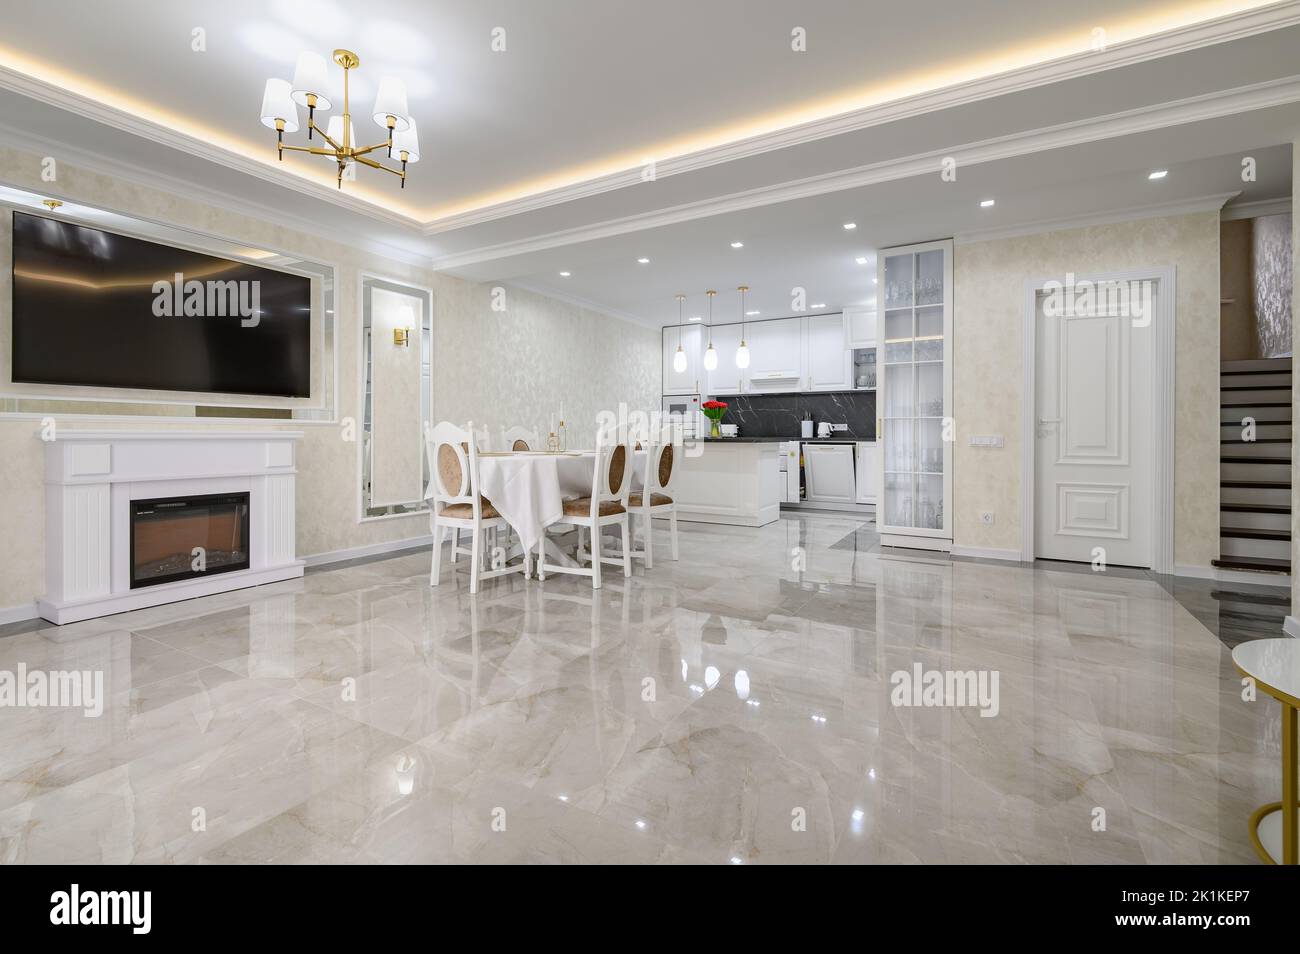 Luxurious large domestic kitchen with marble floor Stock Photo